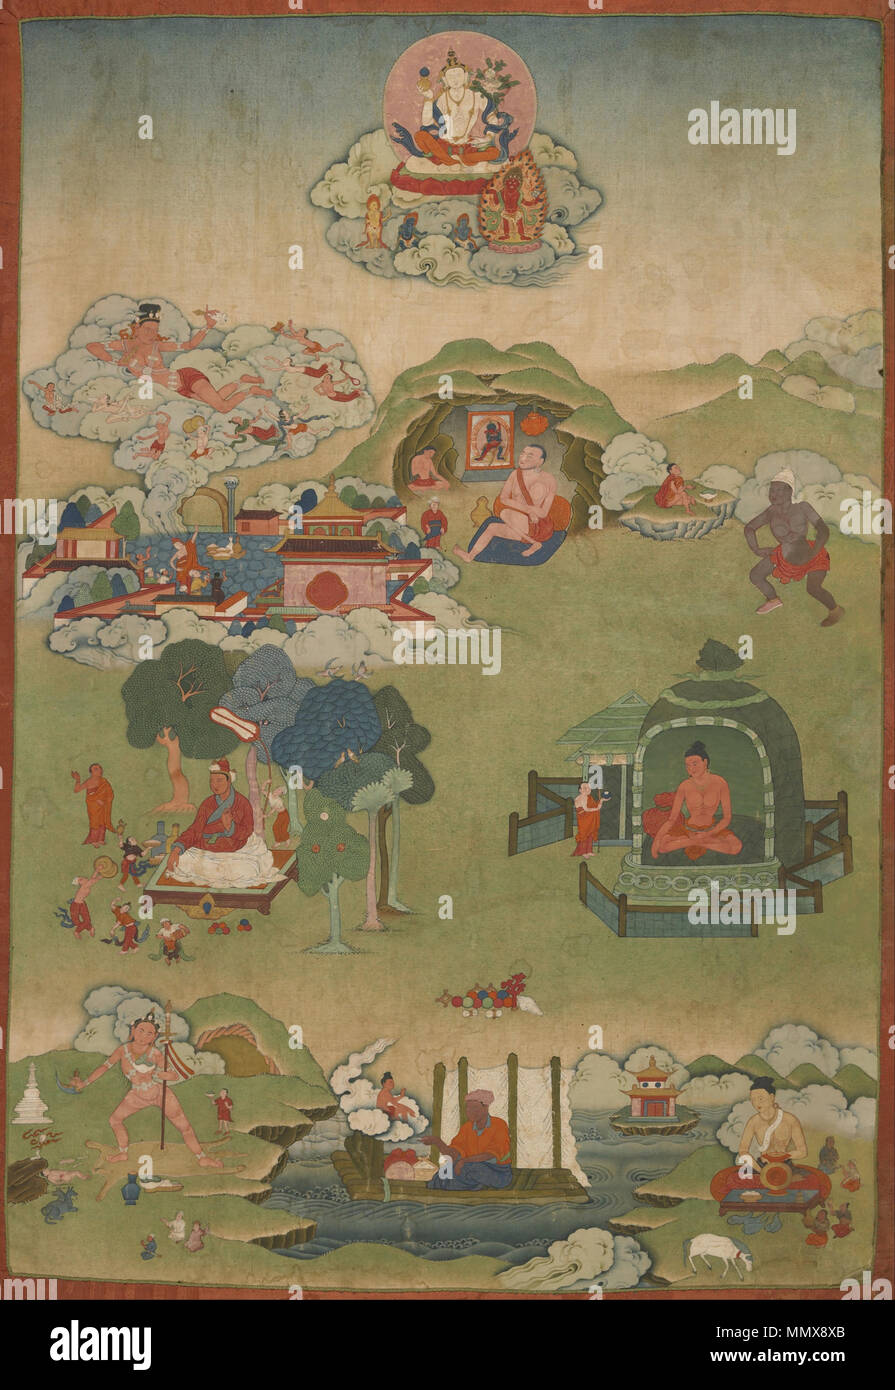 . This is the last painting of an eleven-painting set from Palpung monastery and dedicated to “The Eighty-four Great Tantric Adepts (Mahasiddhas). Especially interesting is the figure of the great adept Putalipa at top center, seated in a cave and gazing at an image of the meditational deity Samvara. The scene offers a view of a tantric Buddhist icon in use. Above in the sky are the white bodhisattva Samantabhadra and, below him, small, red wrathful figure Cakhavartin. The other figures can be identified as: the bodhisattva Samantabhadra; Darikapa; Putalipa; Upanaha; Kokilipa; Anangapa; Lakshm Stock Photo